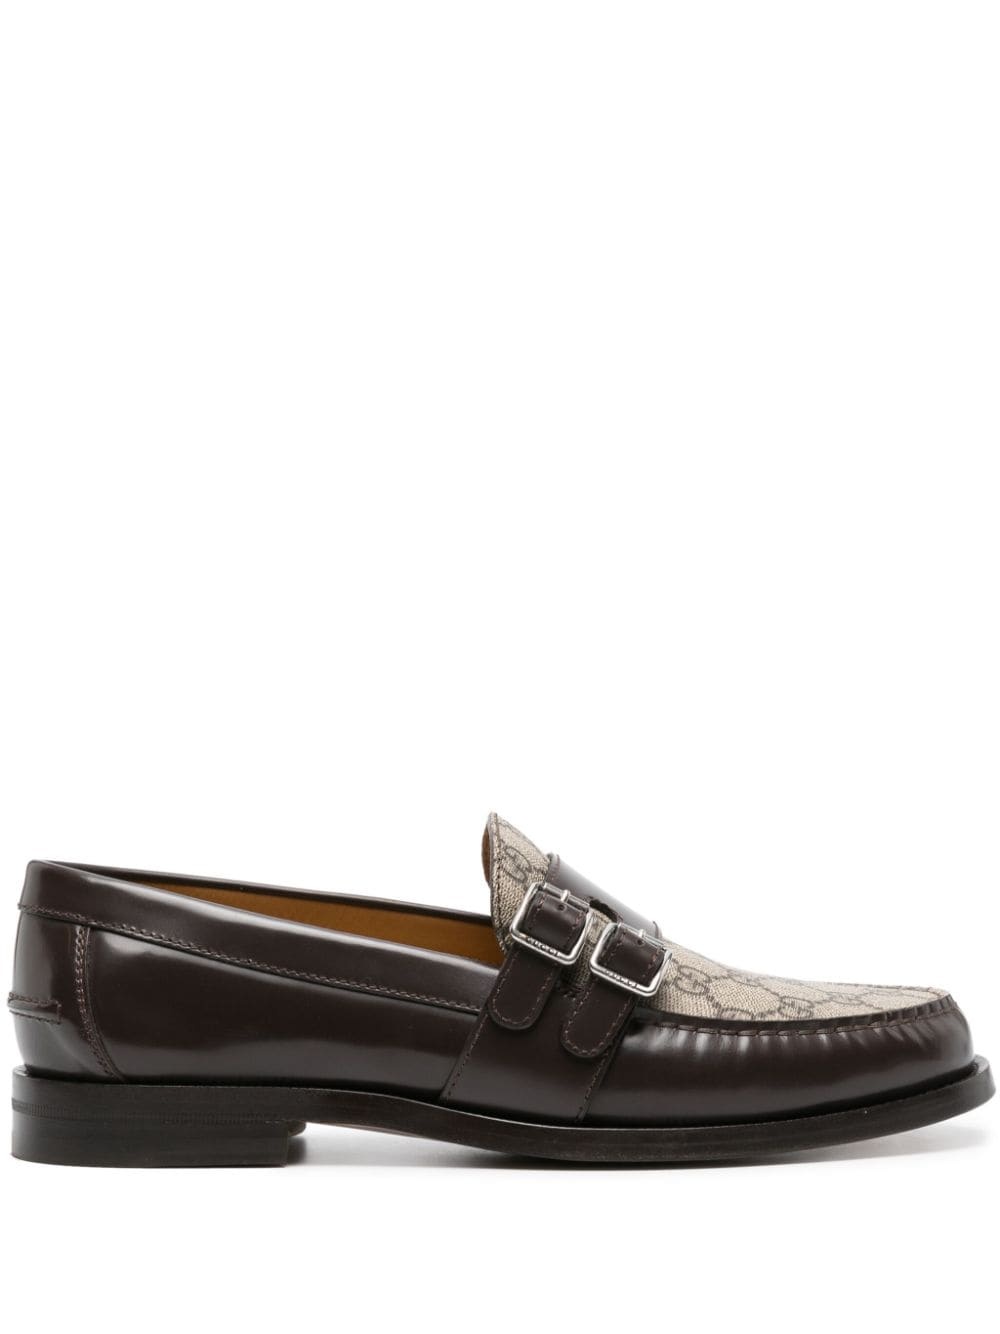 GG Supreme leather loafers - 1